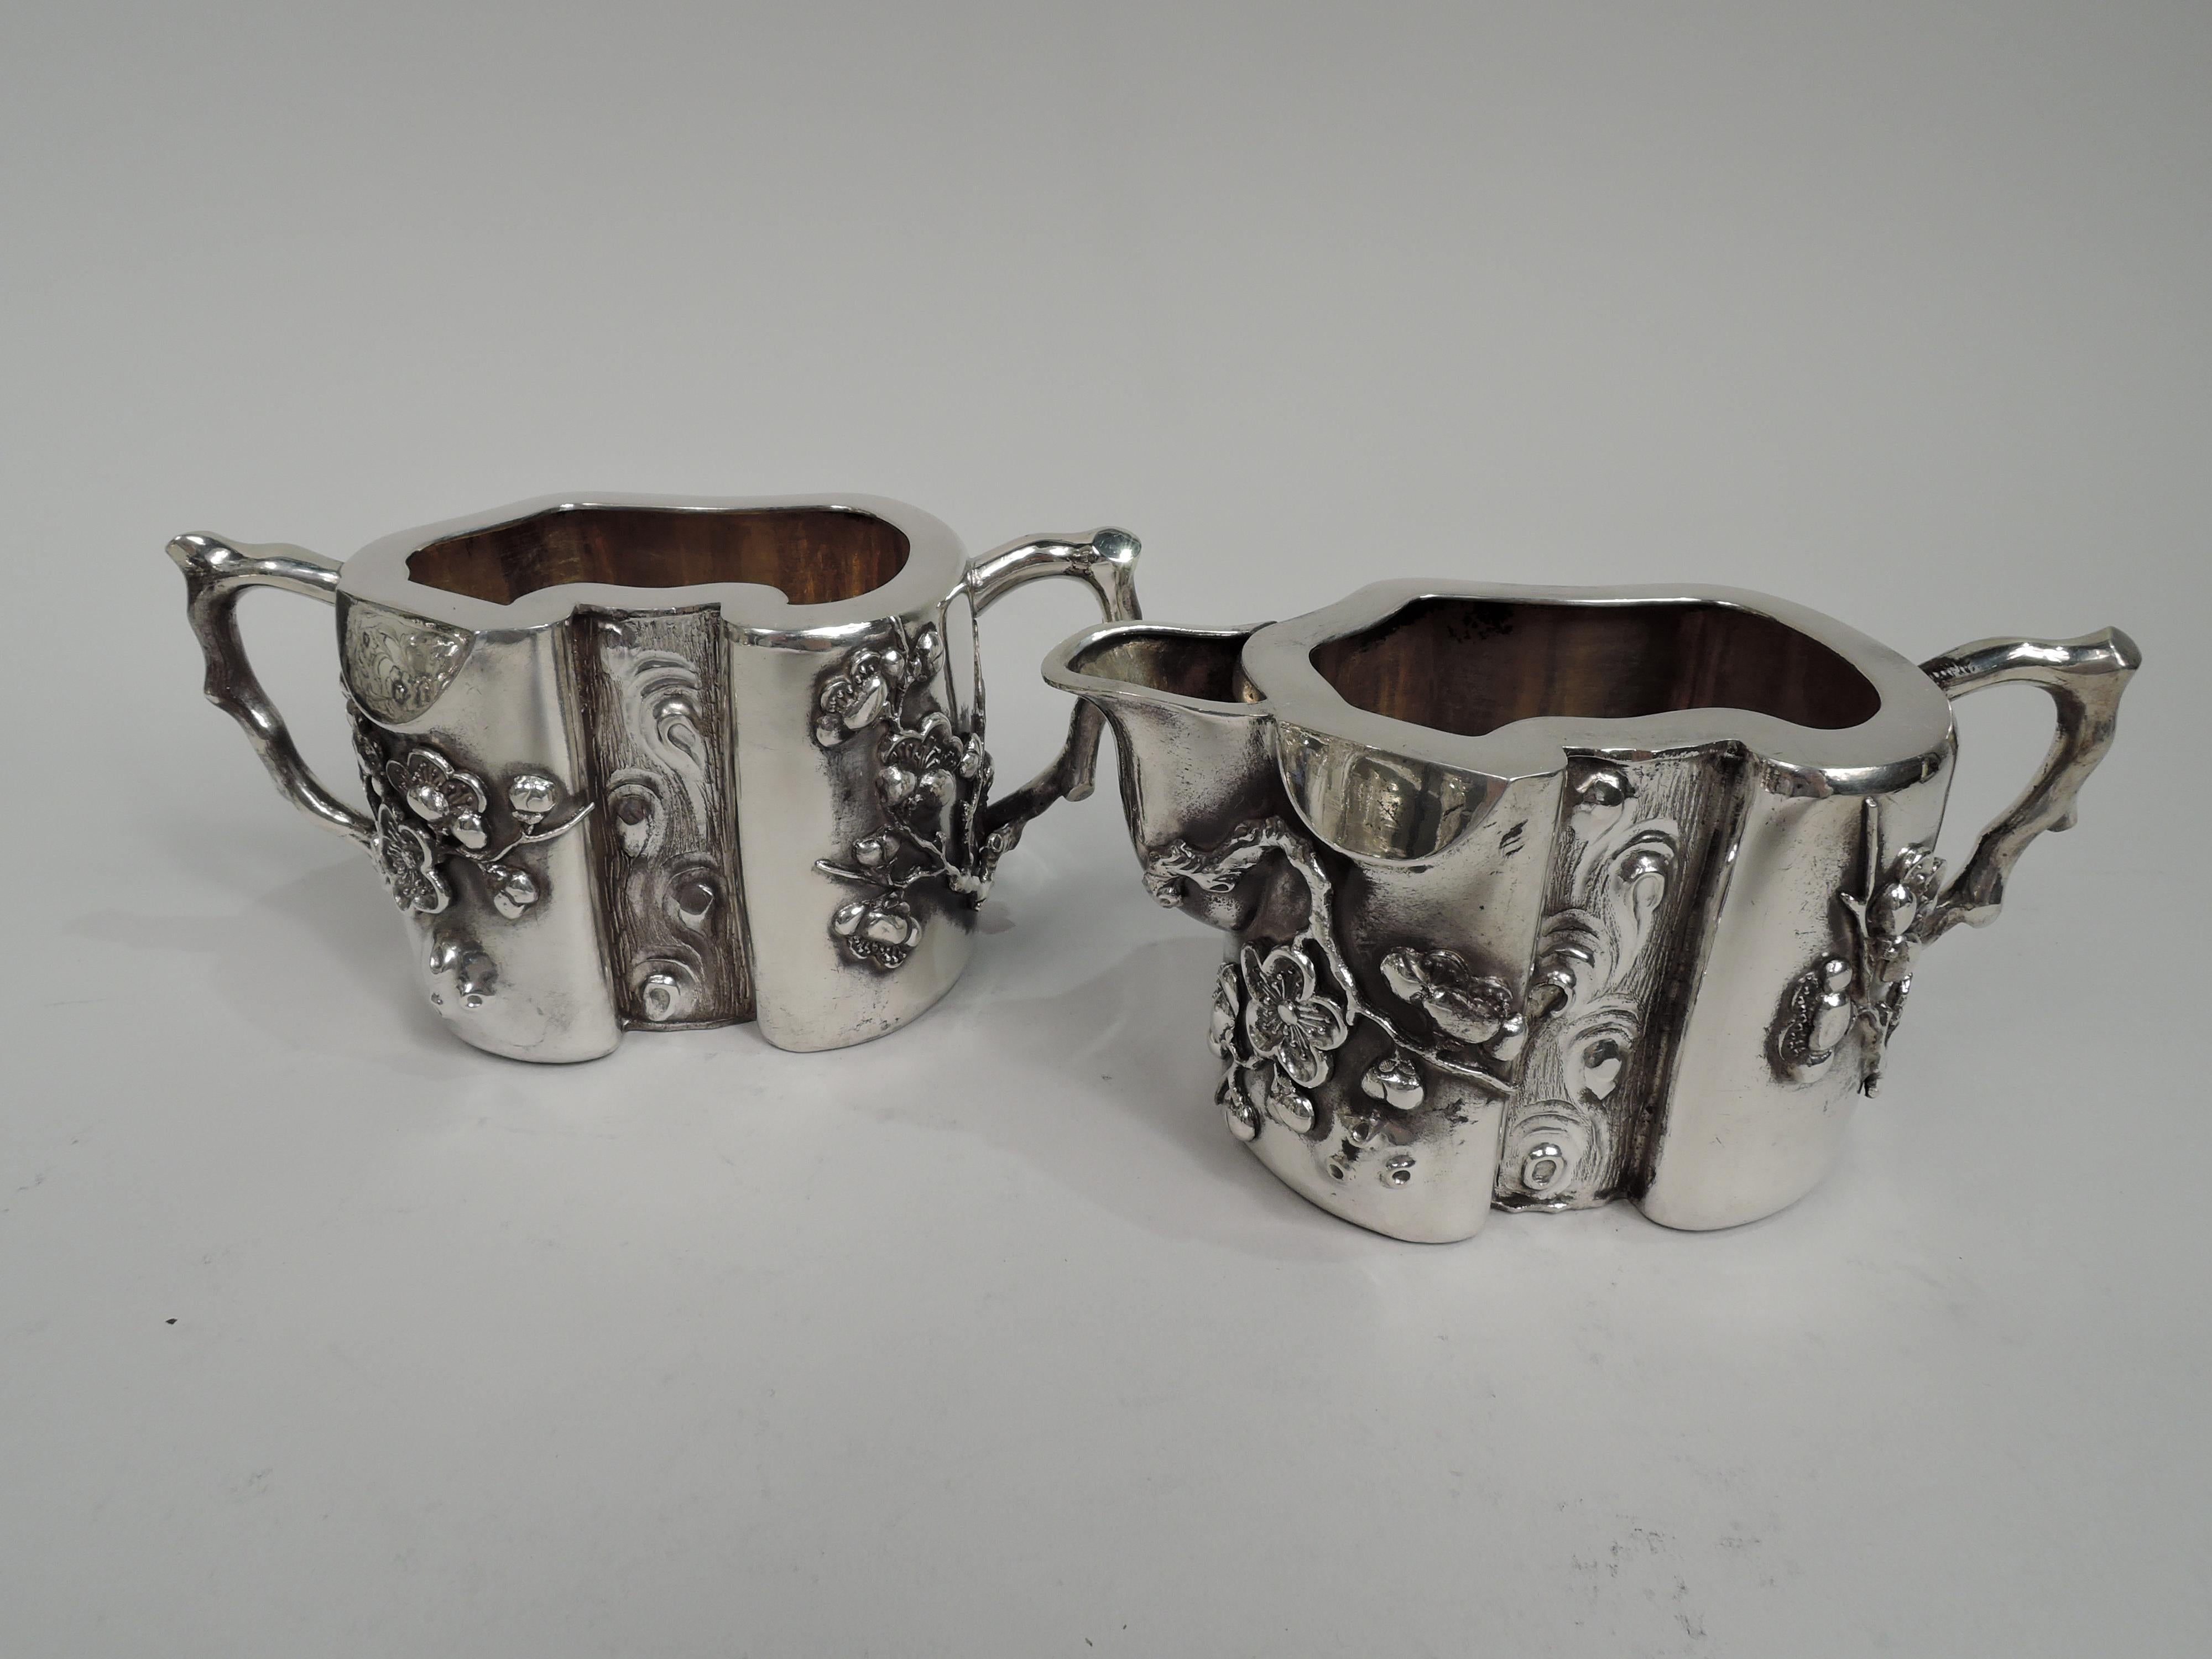 Pair of Chinese silver creamer and sugar, ca 1910. Each: Ovoid serpentine body. Center front inset with striated tree trunk and scrolling burls. Applied blossoming prunus branches. Handles twig form. Creamer has u-spout. Gilt-washed interior. Both